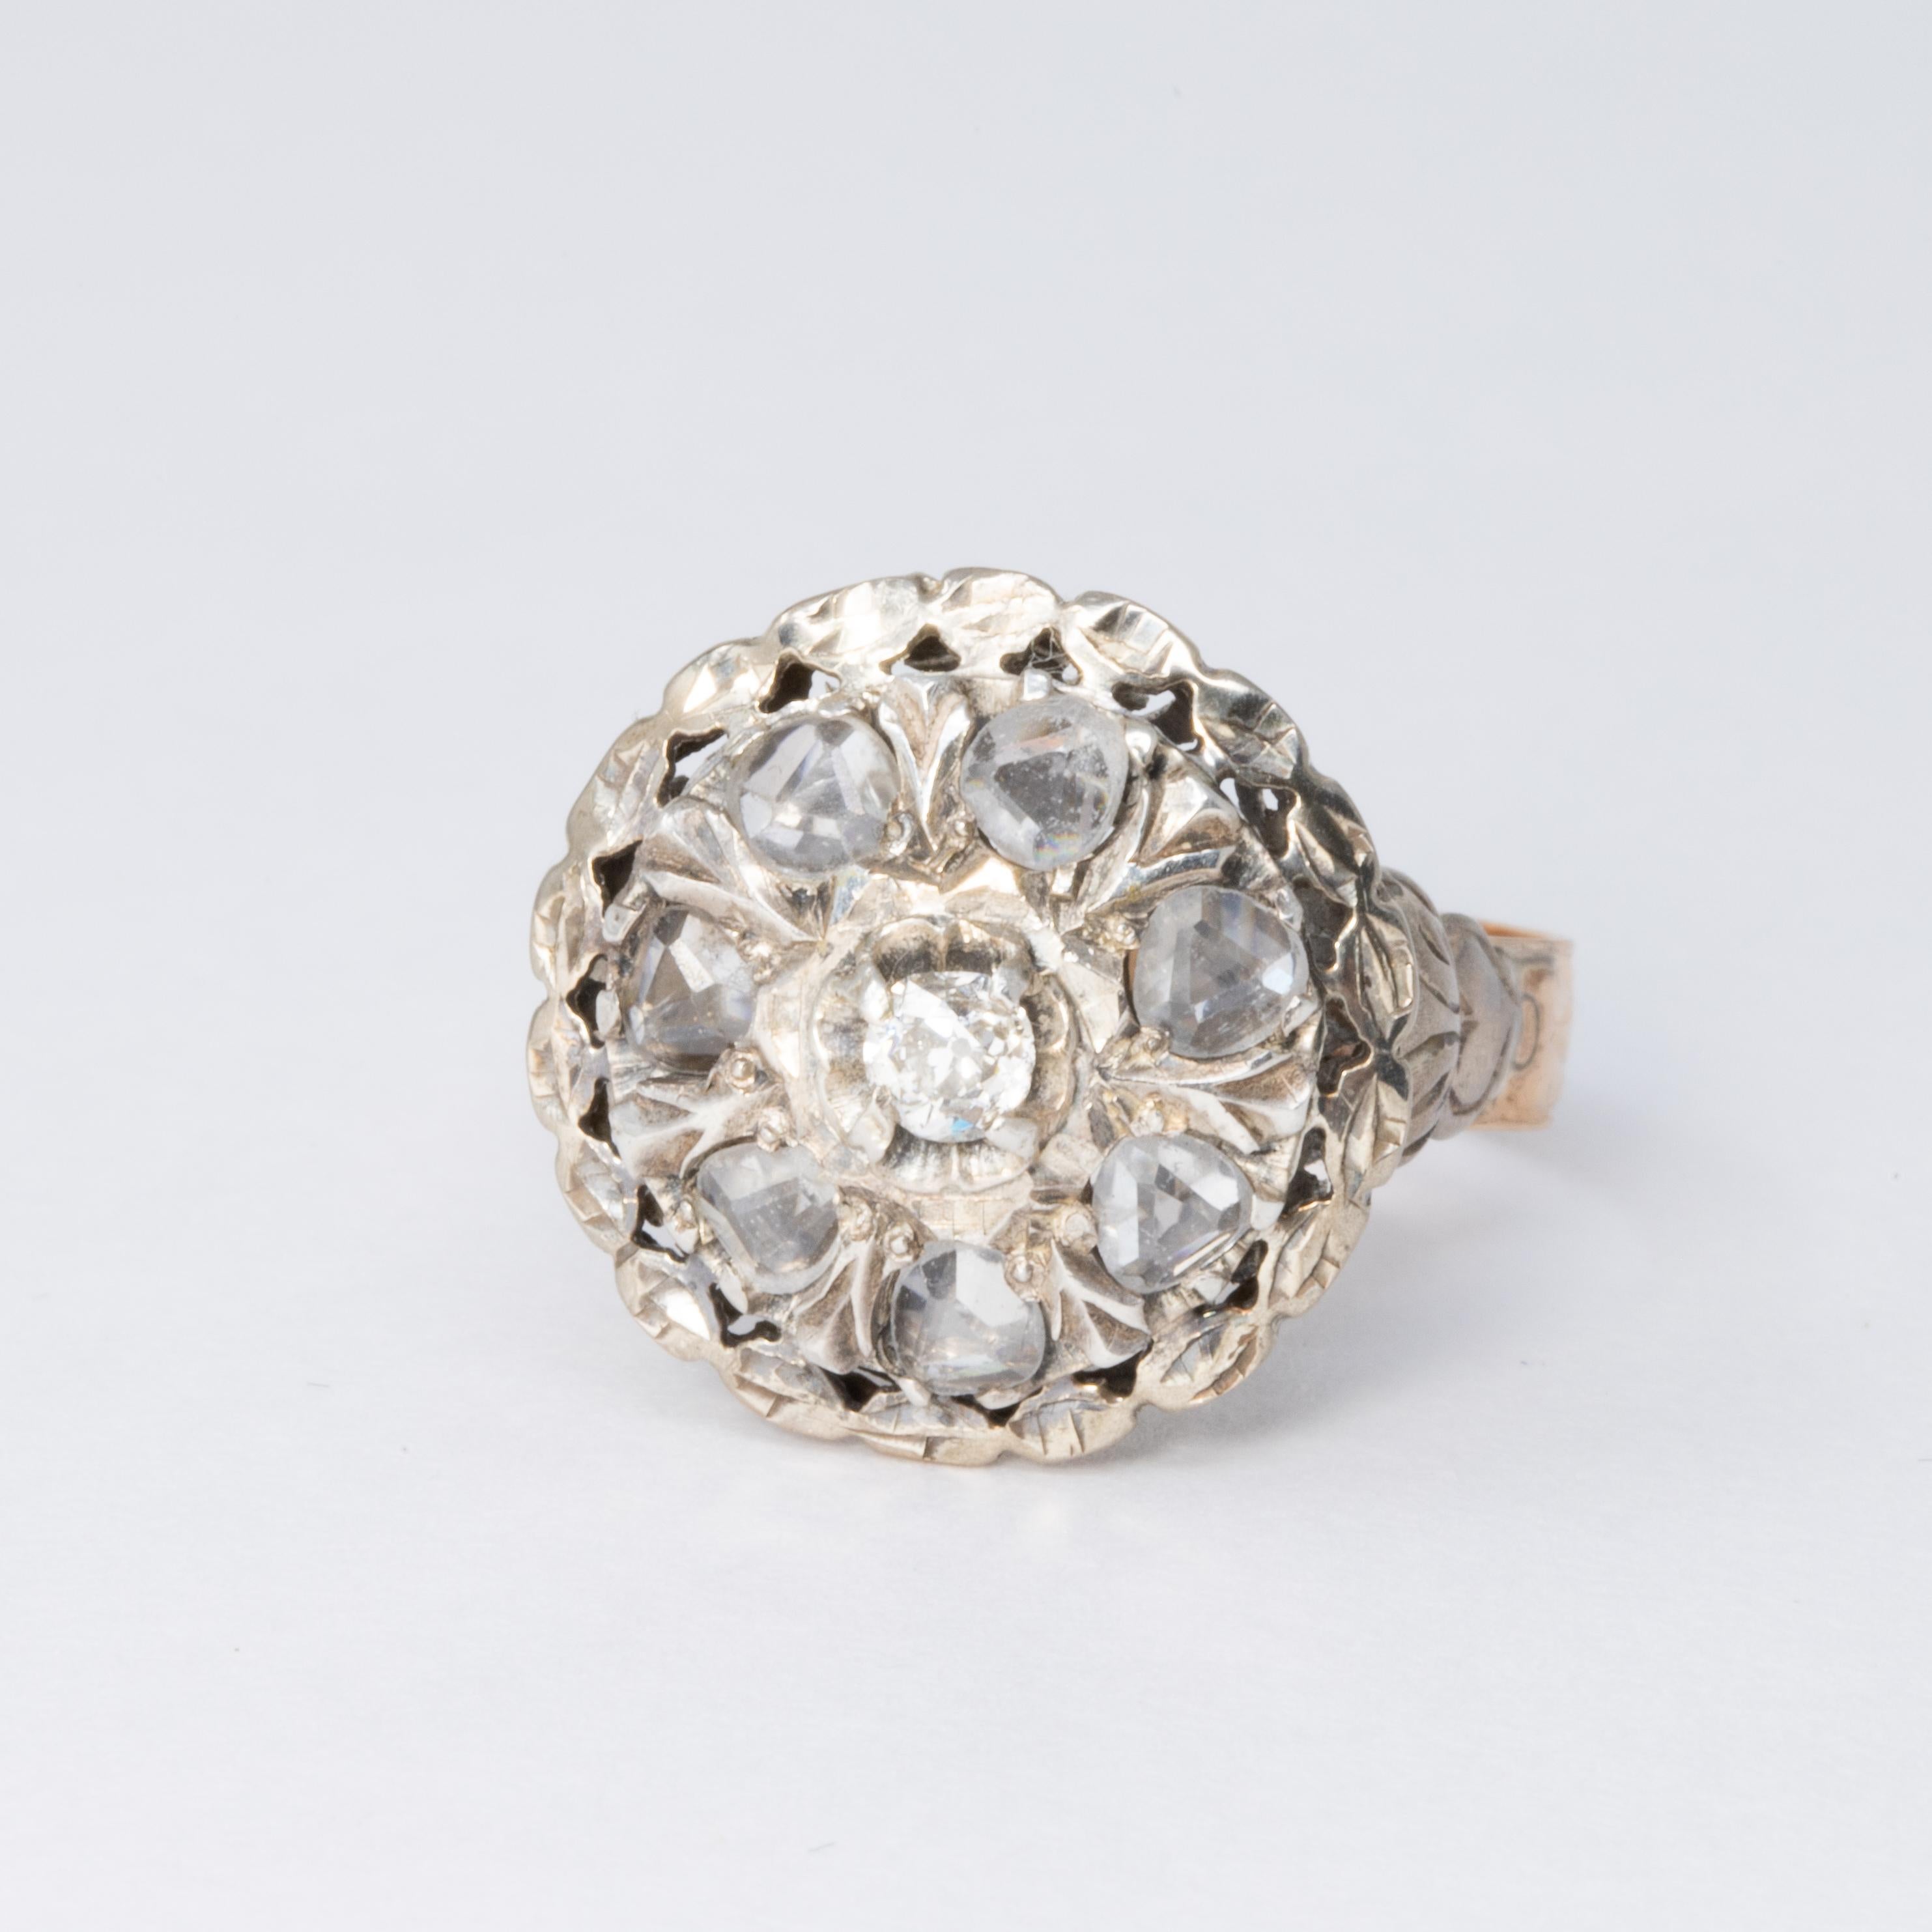 An exquisite antique ring, featuring an elevated halo-styled face design with a centerpiece 0.20 ct round diamond, surrounded with 7 flat-top, rose-cut quartz crystals. The setting is decorated with sophisticated, Victorian-style, accents.

10K gold